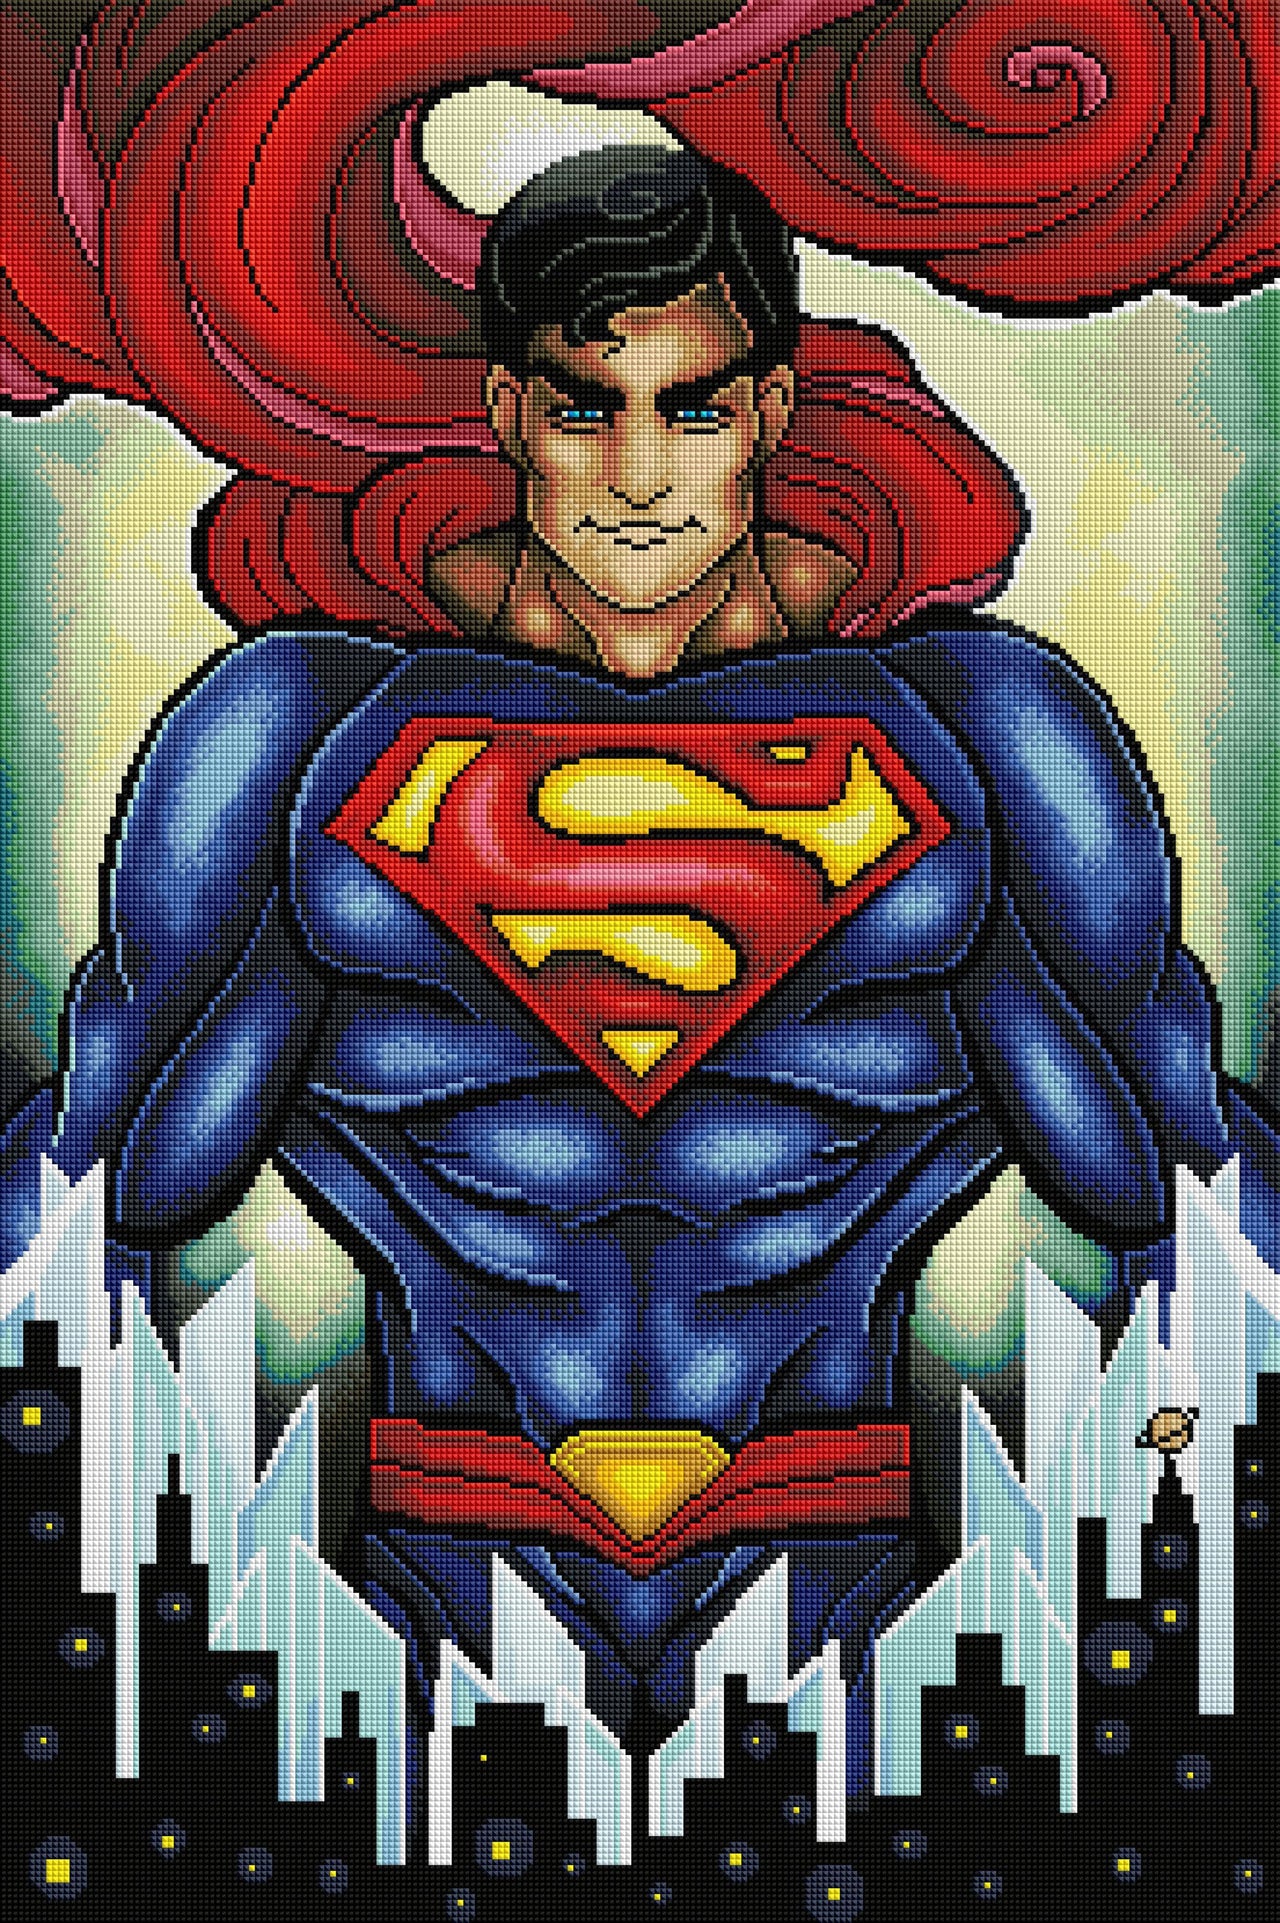 Diamond Painting Superman (MM) 22" x 33" (56cm x 84cm) / Square With 51 Colors Including 4 ABs / 73,372